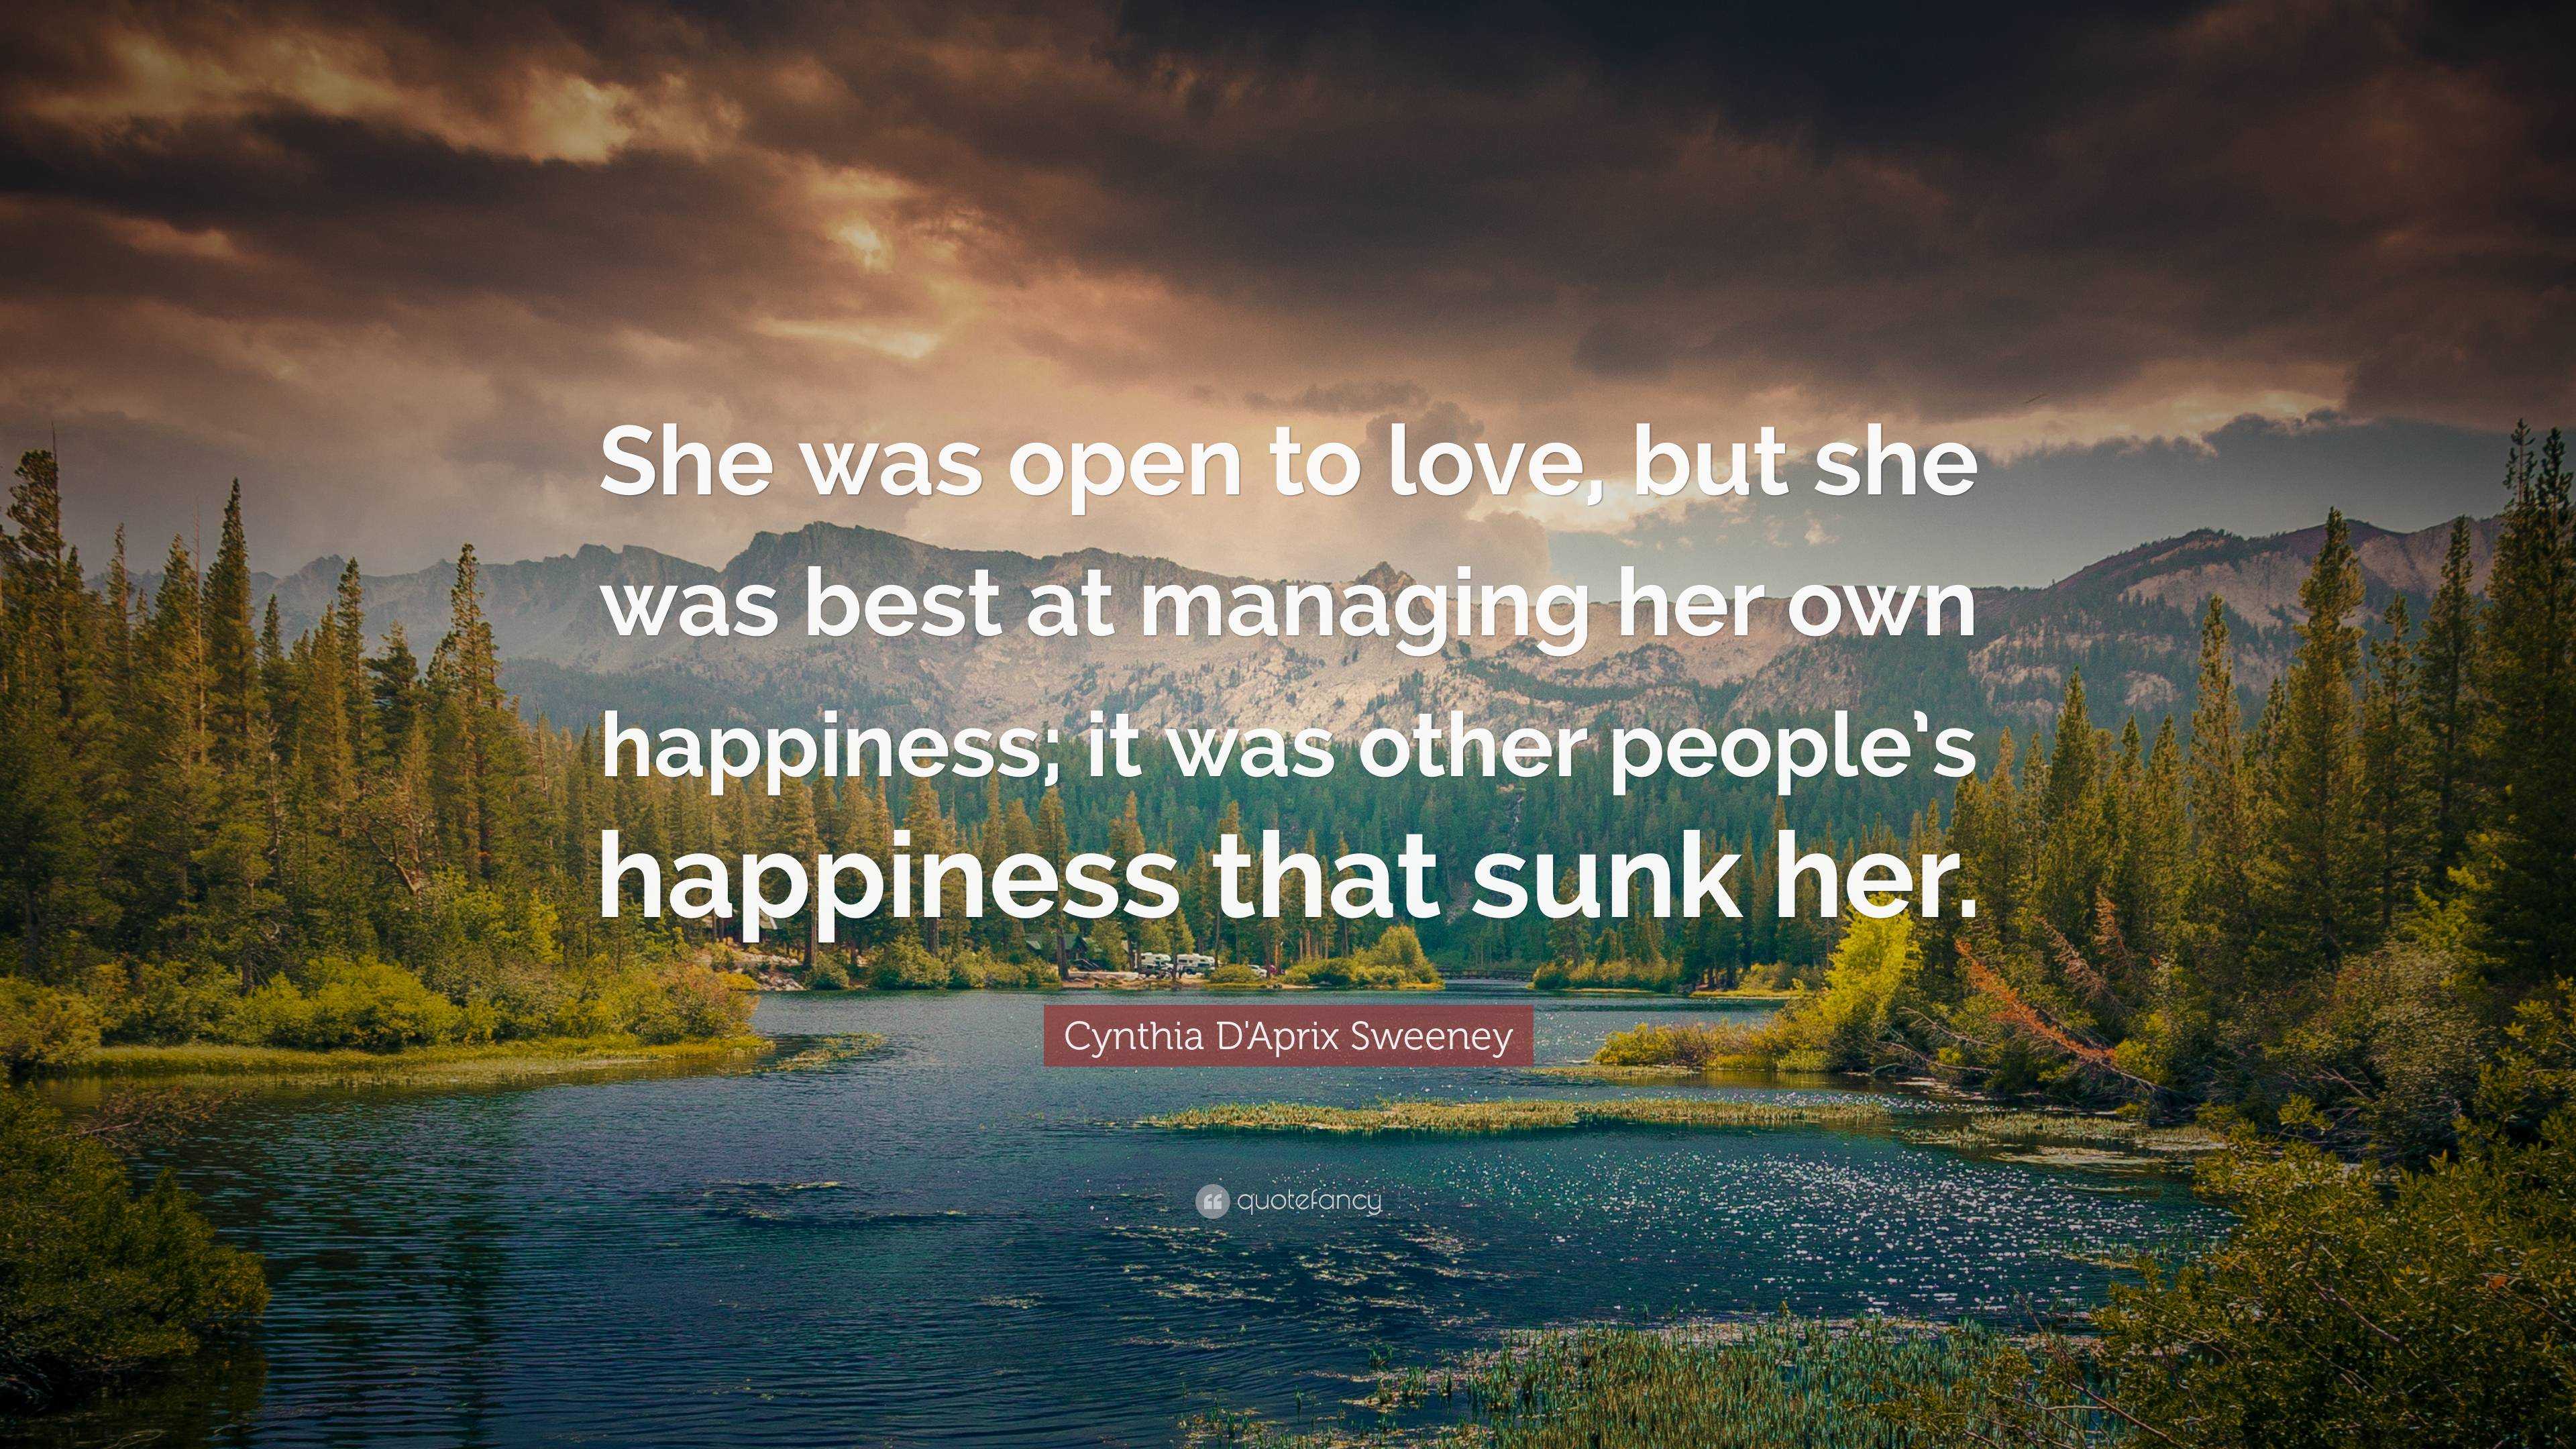 Cynthia D'Aprix Sweeney Quote: “She was open to love, but she was best ...